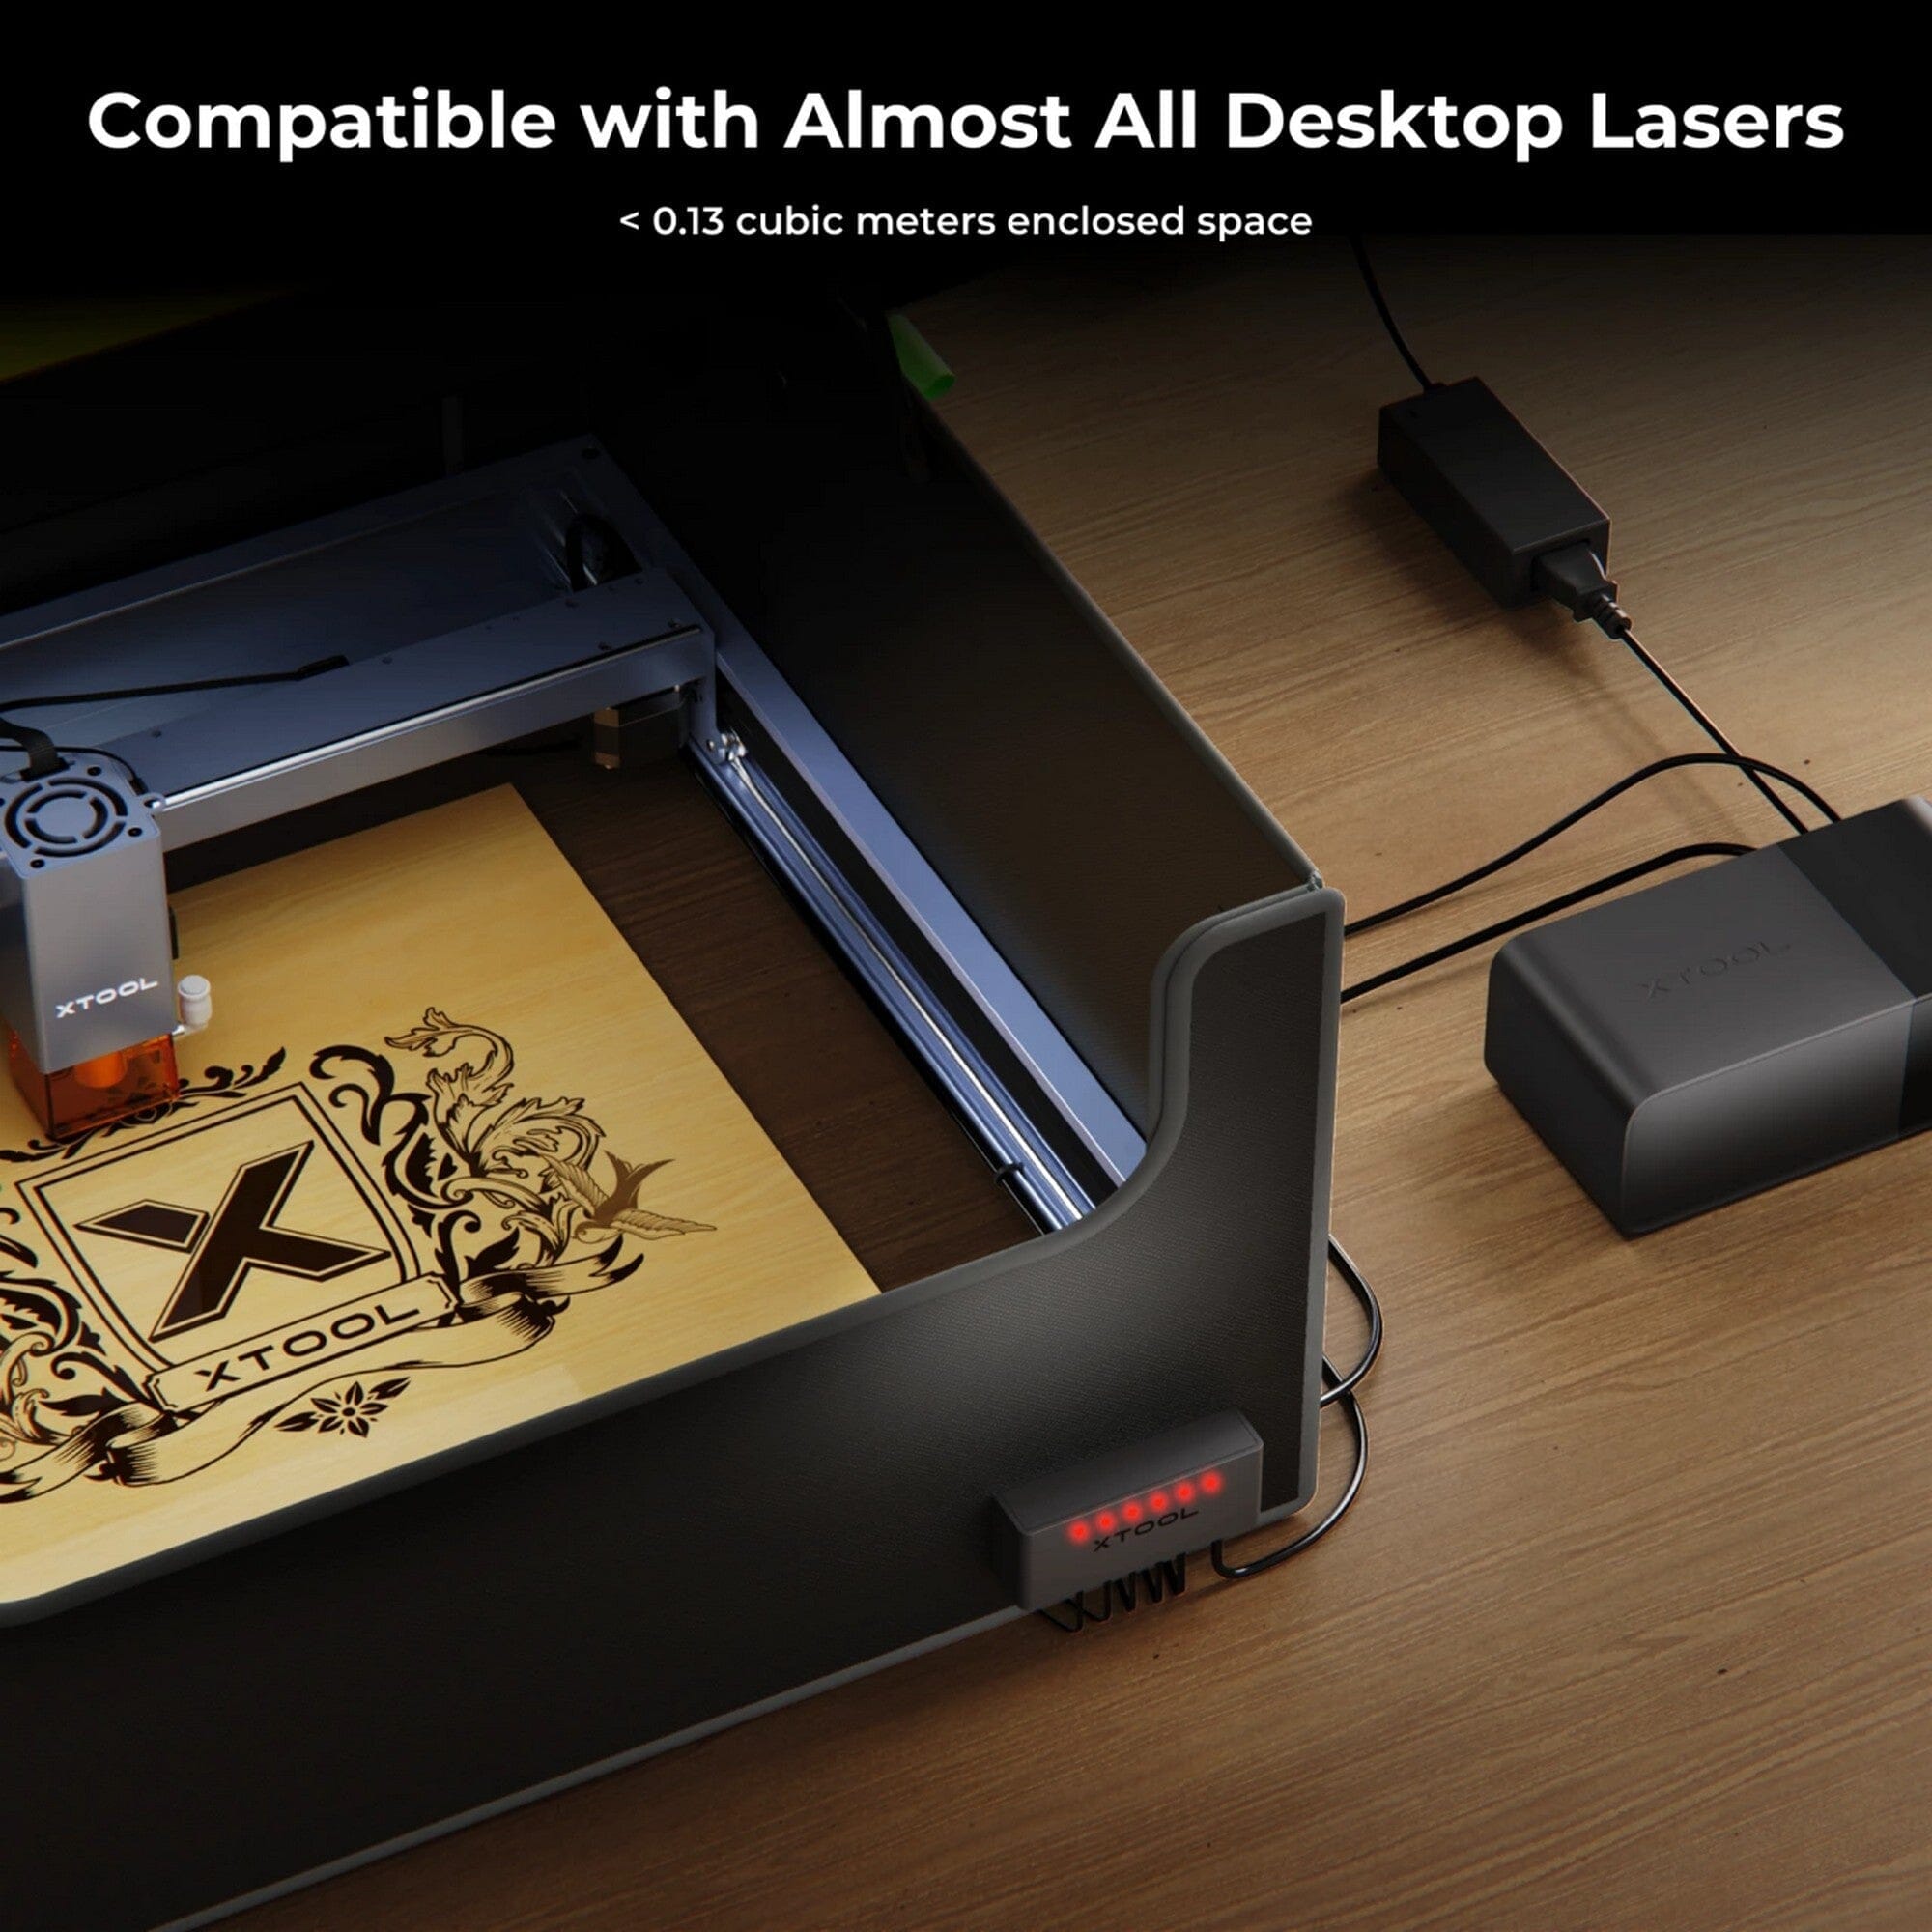 How to Set up the xTool S1 Enclosed Diode Laser Cutter - Keeping it Simple